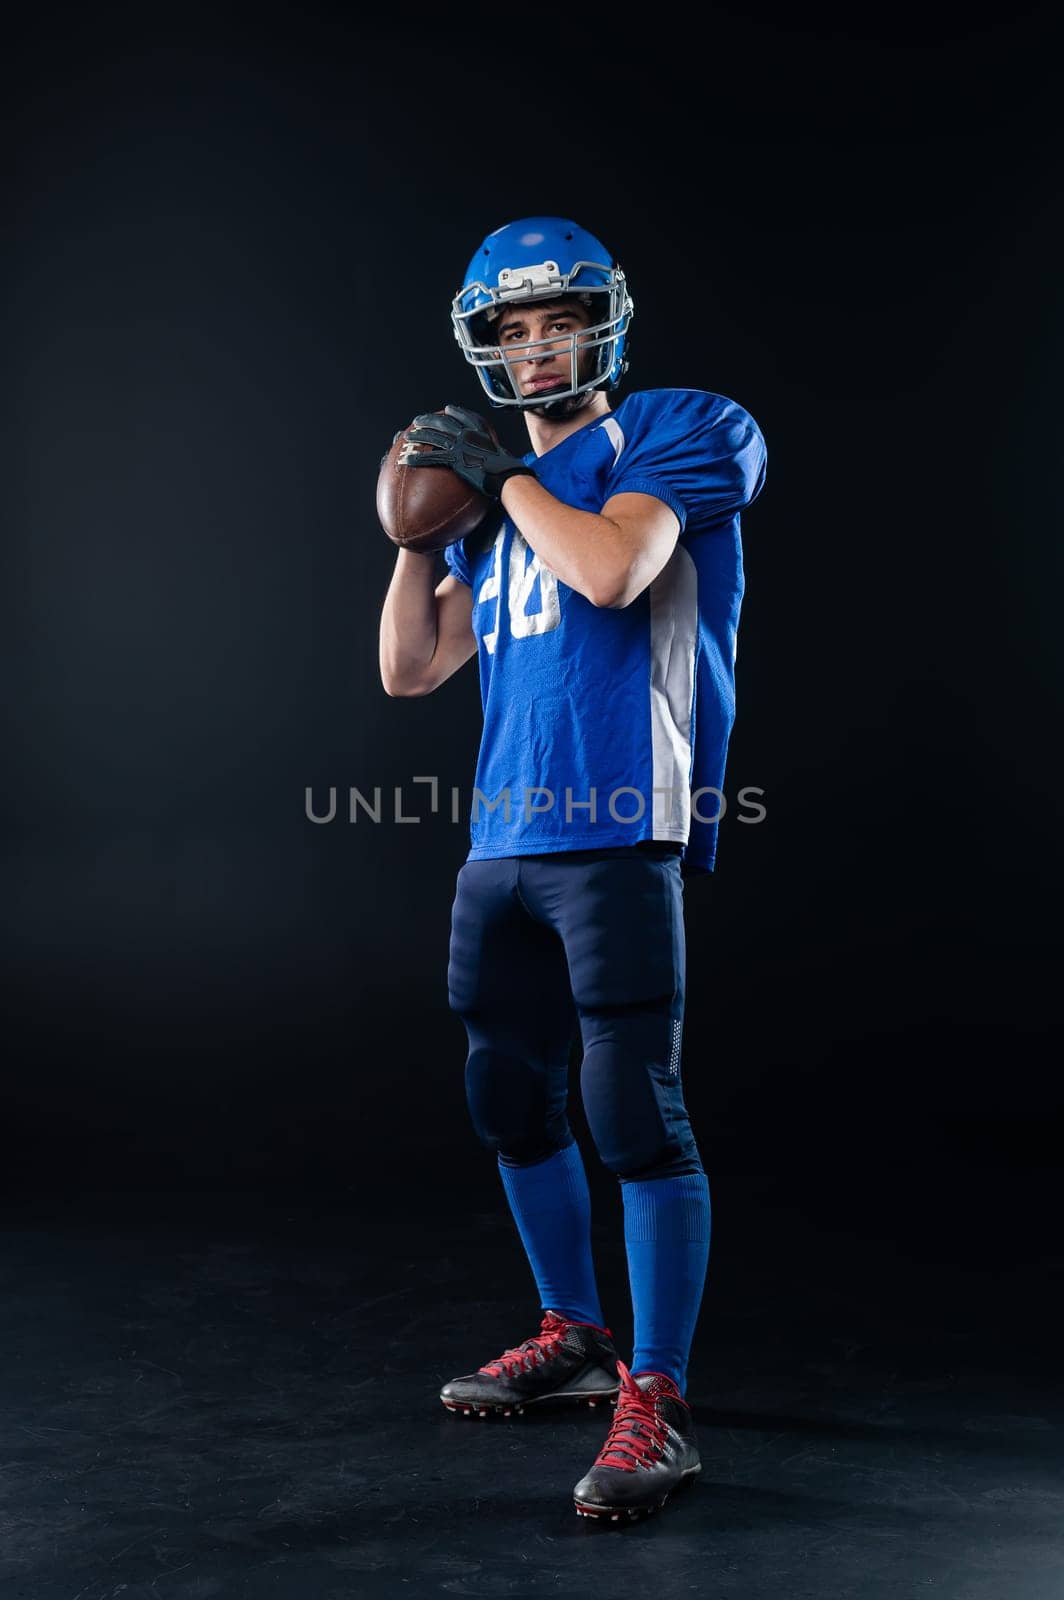 Portrait of a man in a blue uniform for american football on a black background